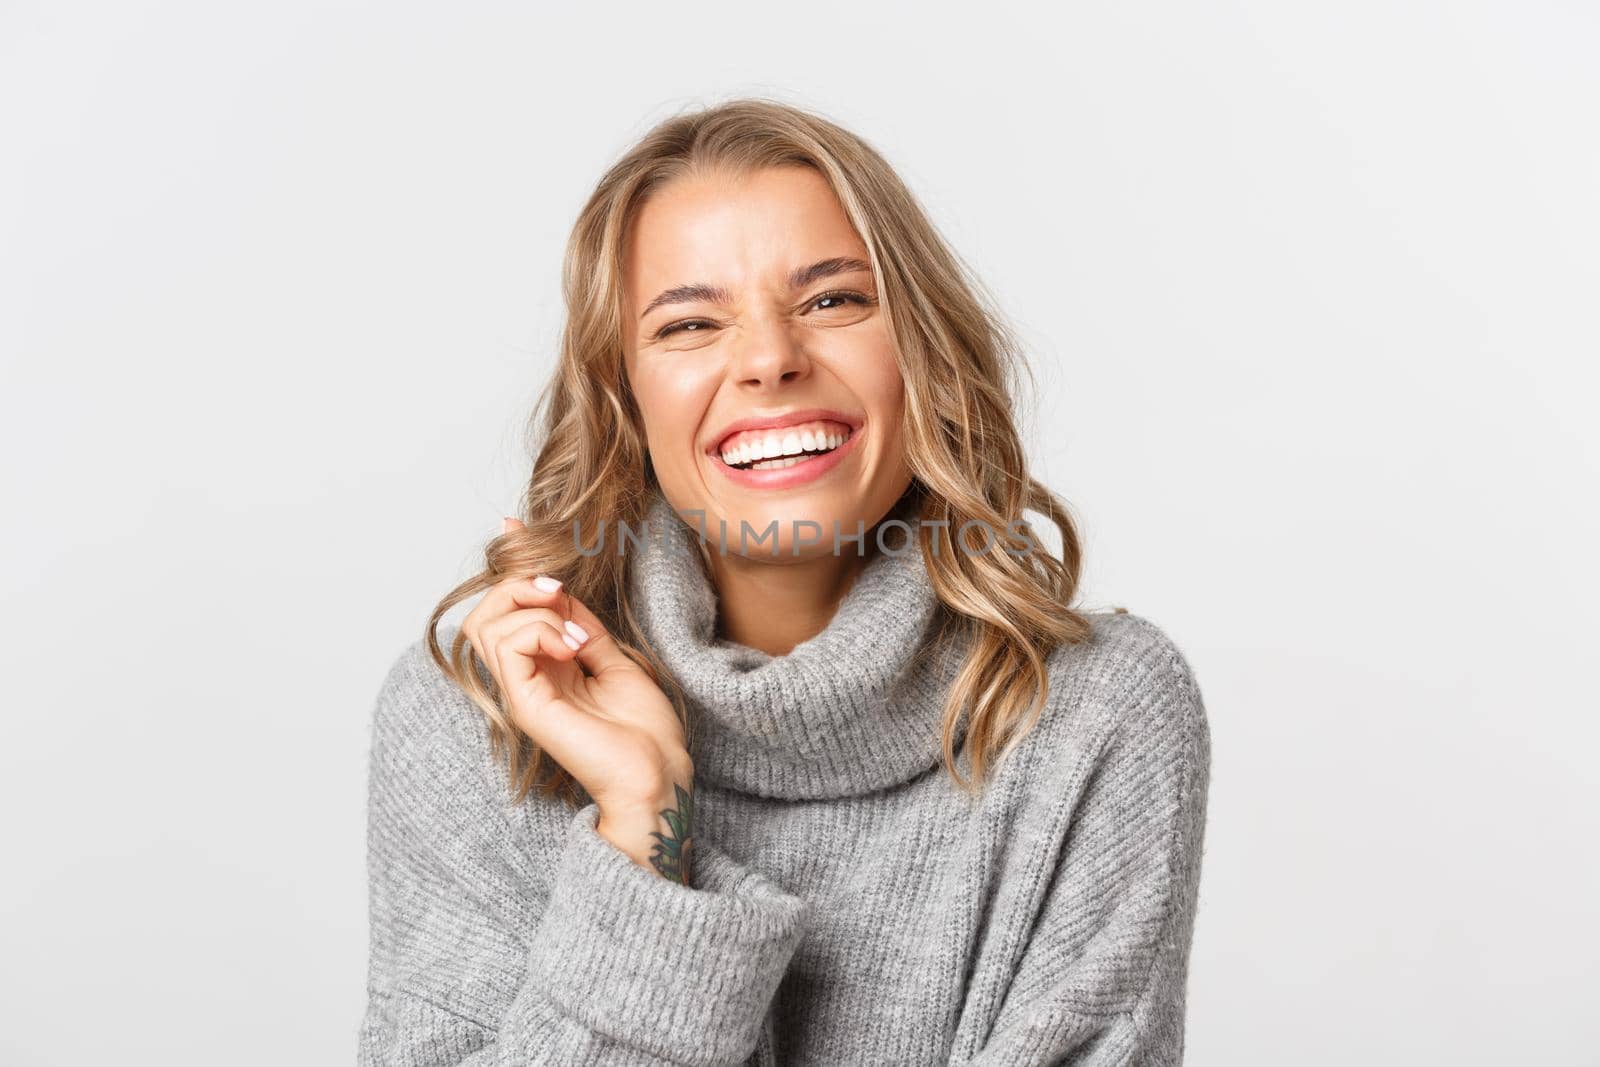 Close-up of attractive happy woman in grey sweater, laughing and smiling, express positivity, standing over white background.